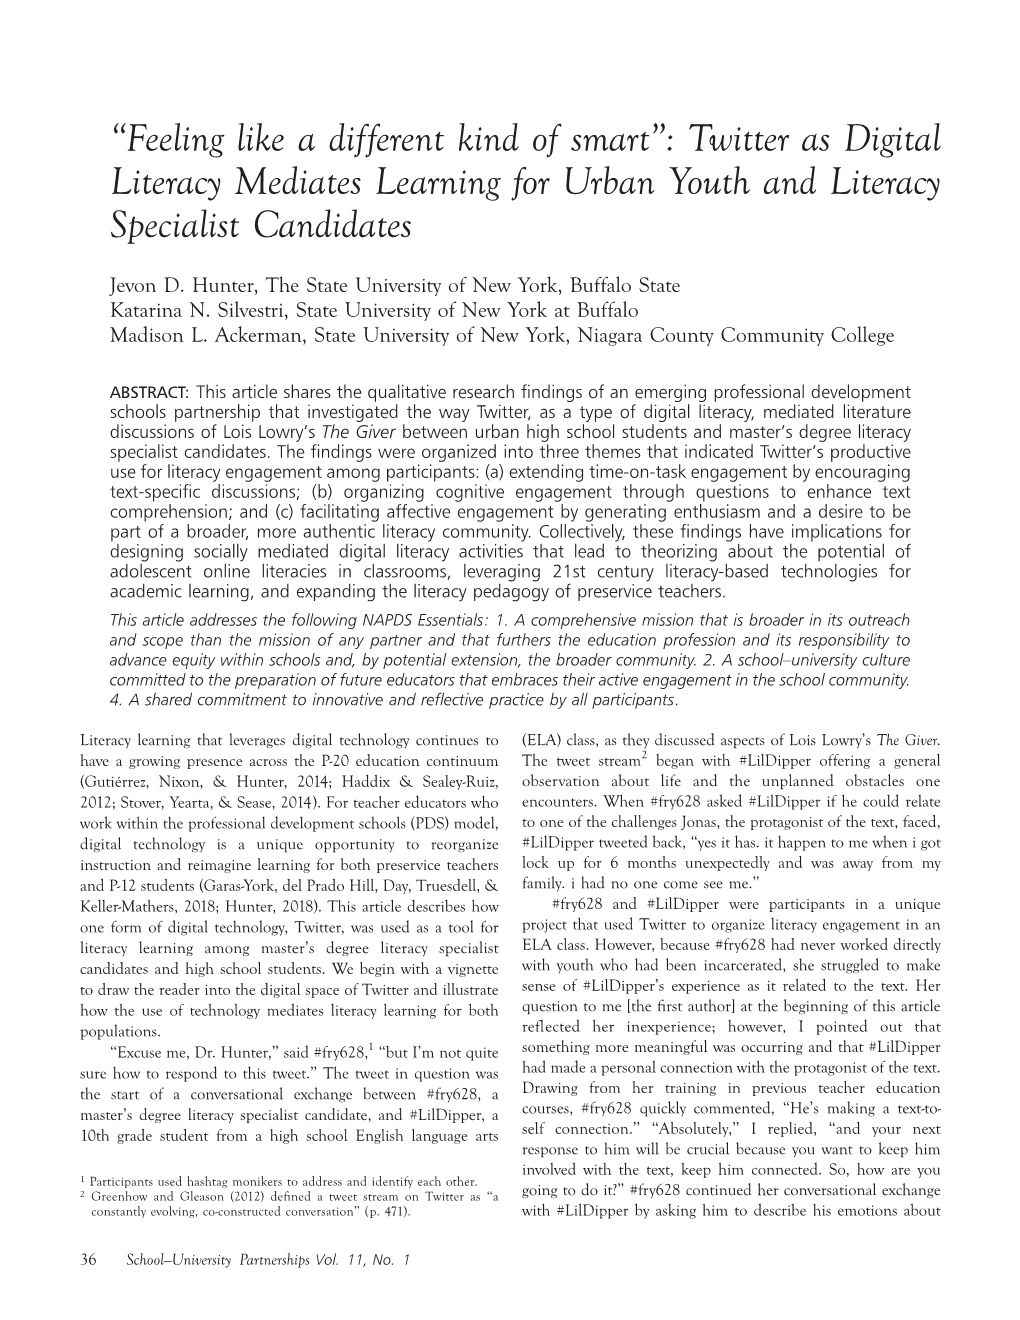 Twitter As Digital Literacy Mediates Learning for Urban Youth and Literacy Specialist Candidates